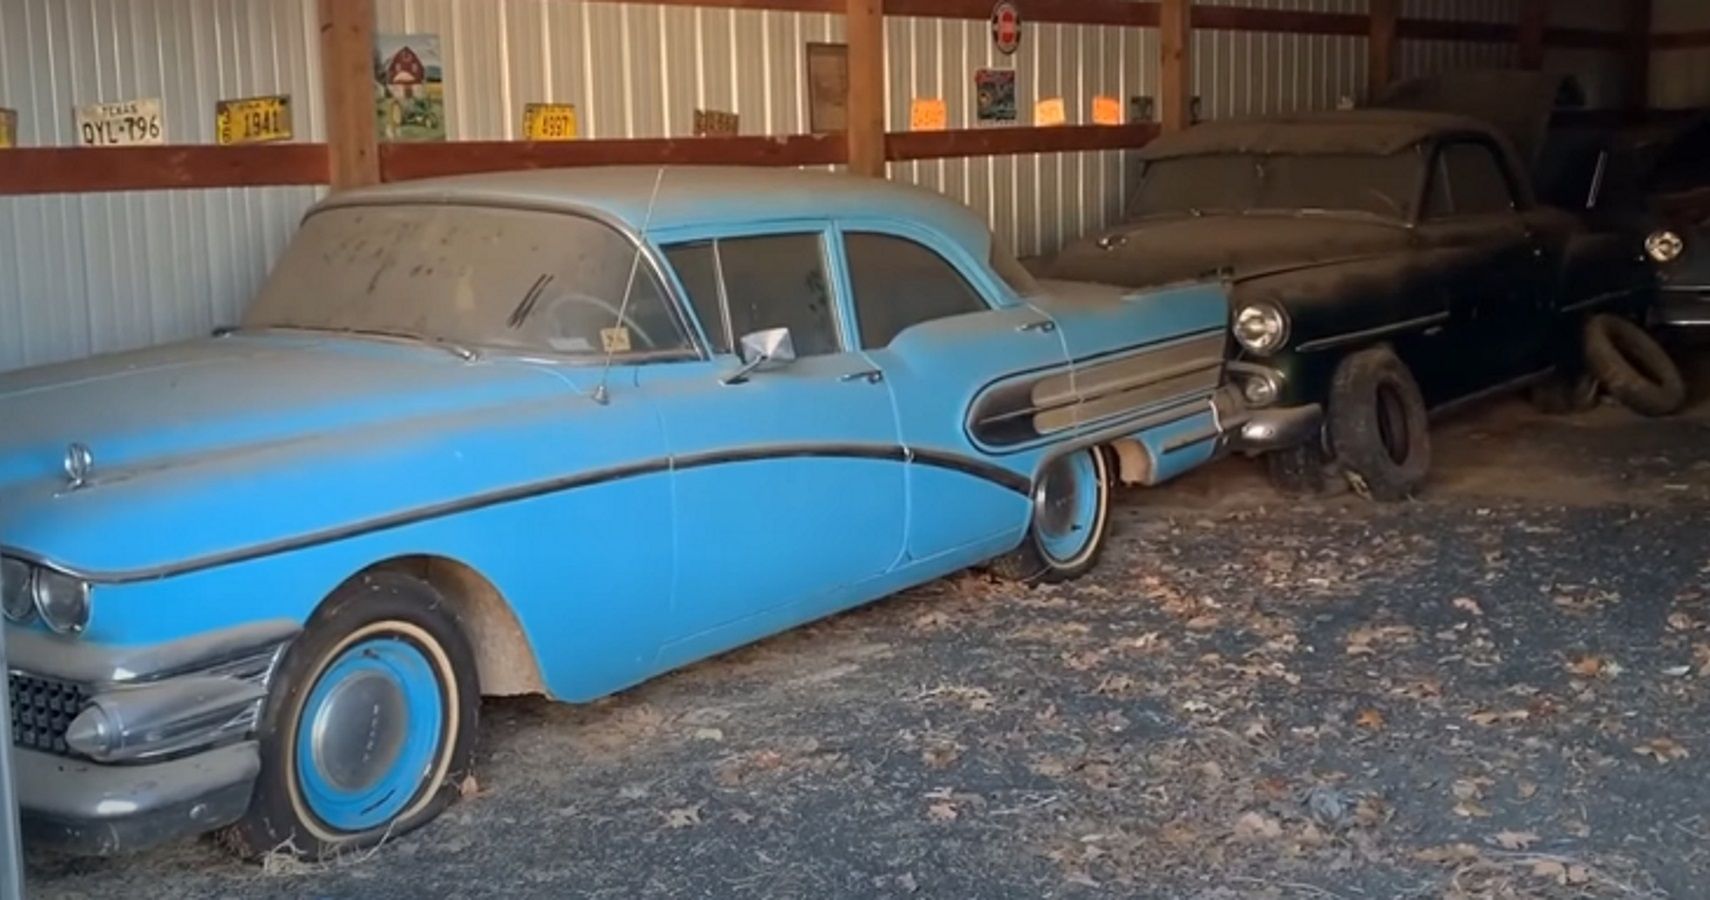 Oklahoma Barn Find Reveals Classic Dodge, Buick And More